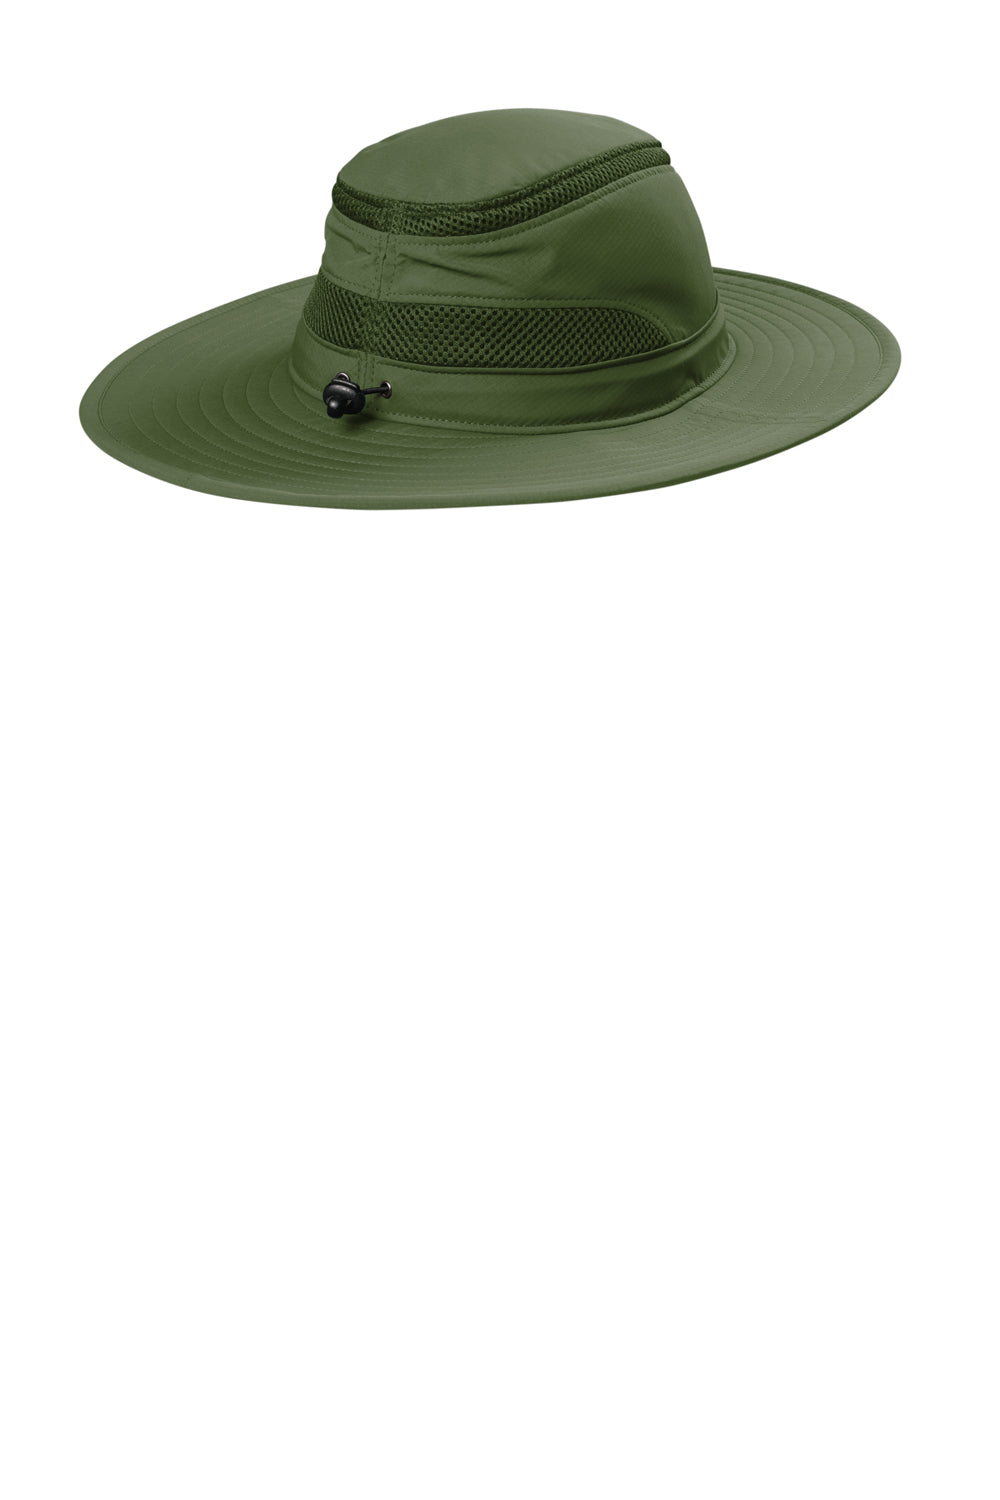 Port Authority Mens Moisture Wicking Ventilated Wide Brim Hat - Olive Leaf  Green